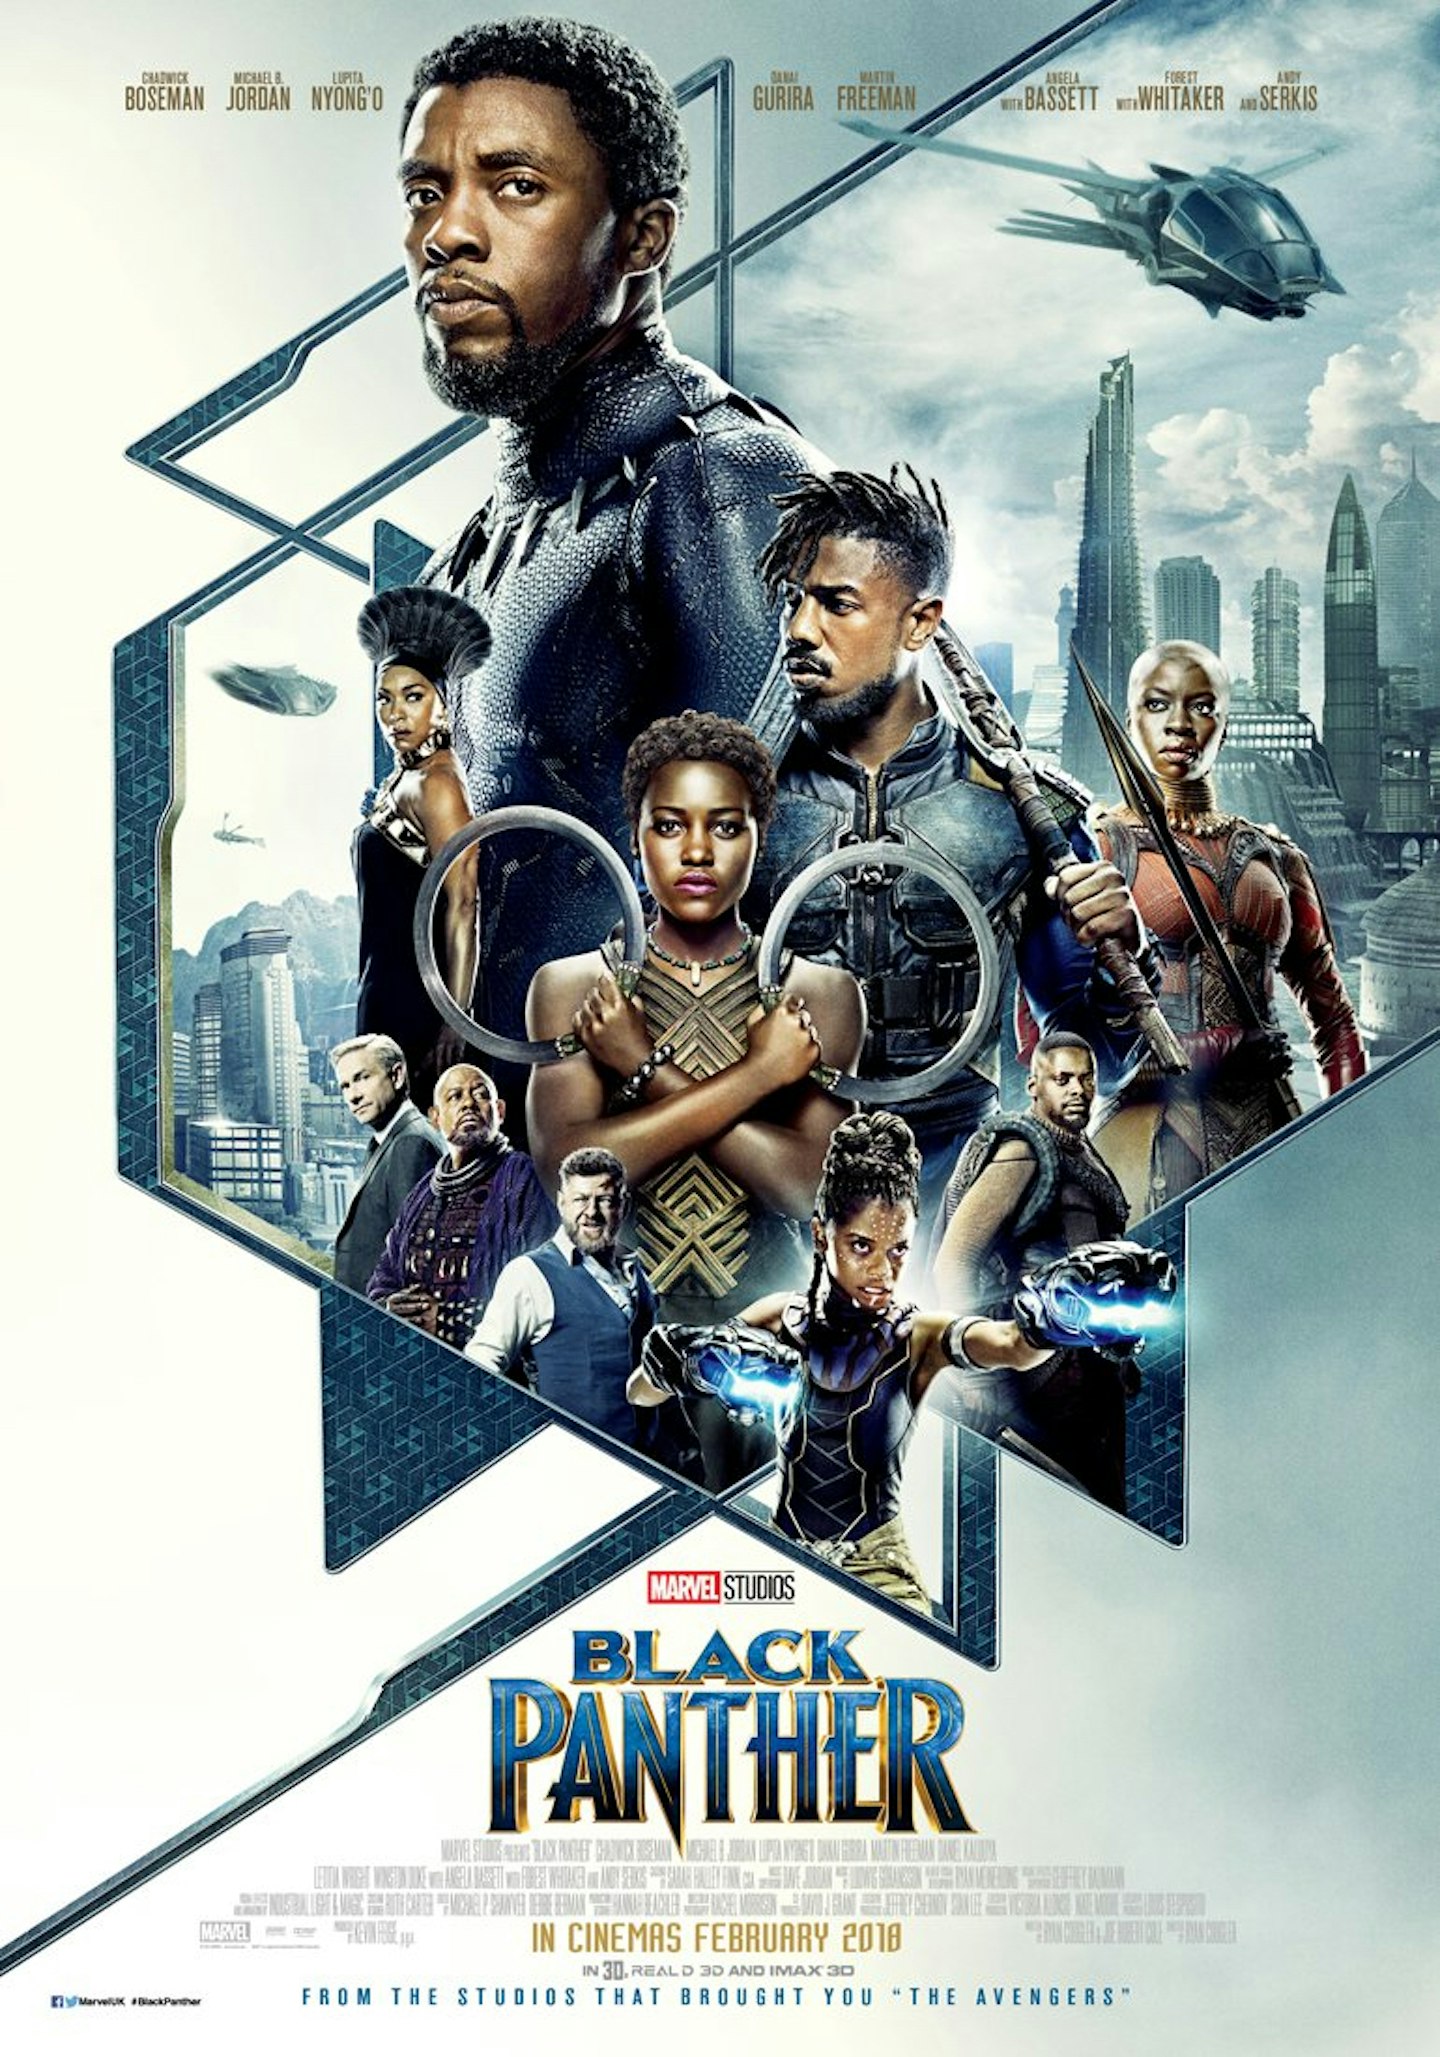 New Black Panther poster